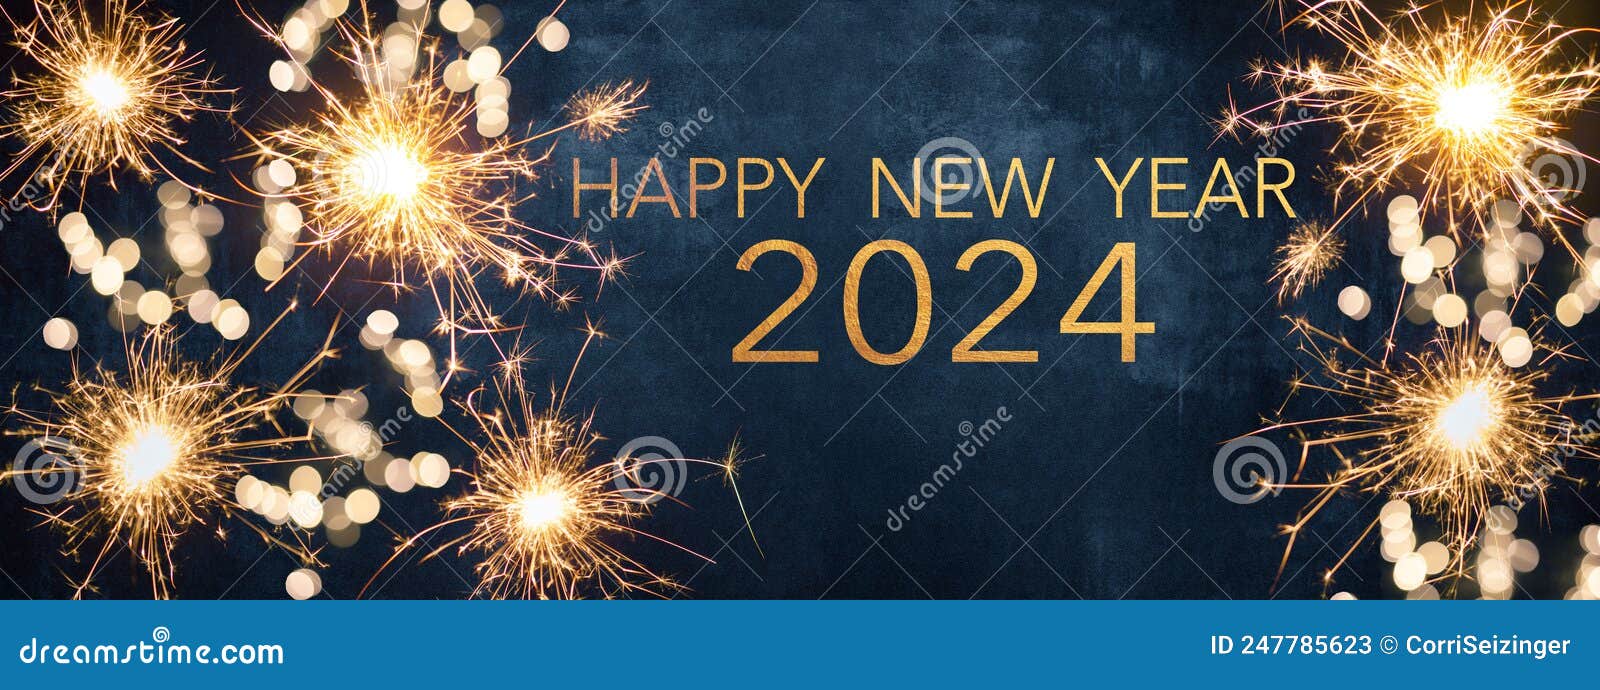 happy new year 2024 / new year`s eve party background greeting card  - sparklers and bokeh lights, on dark blue night sky